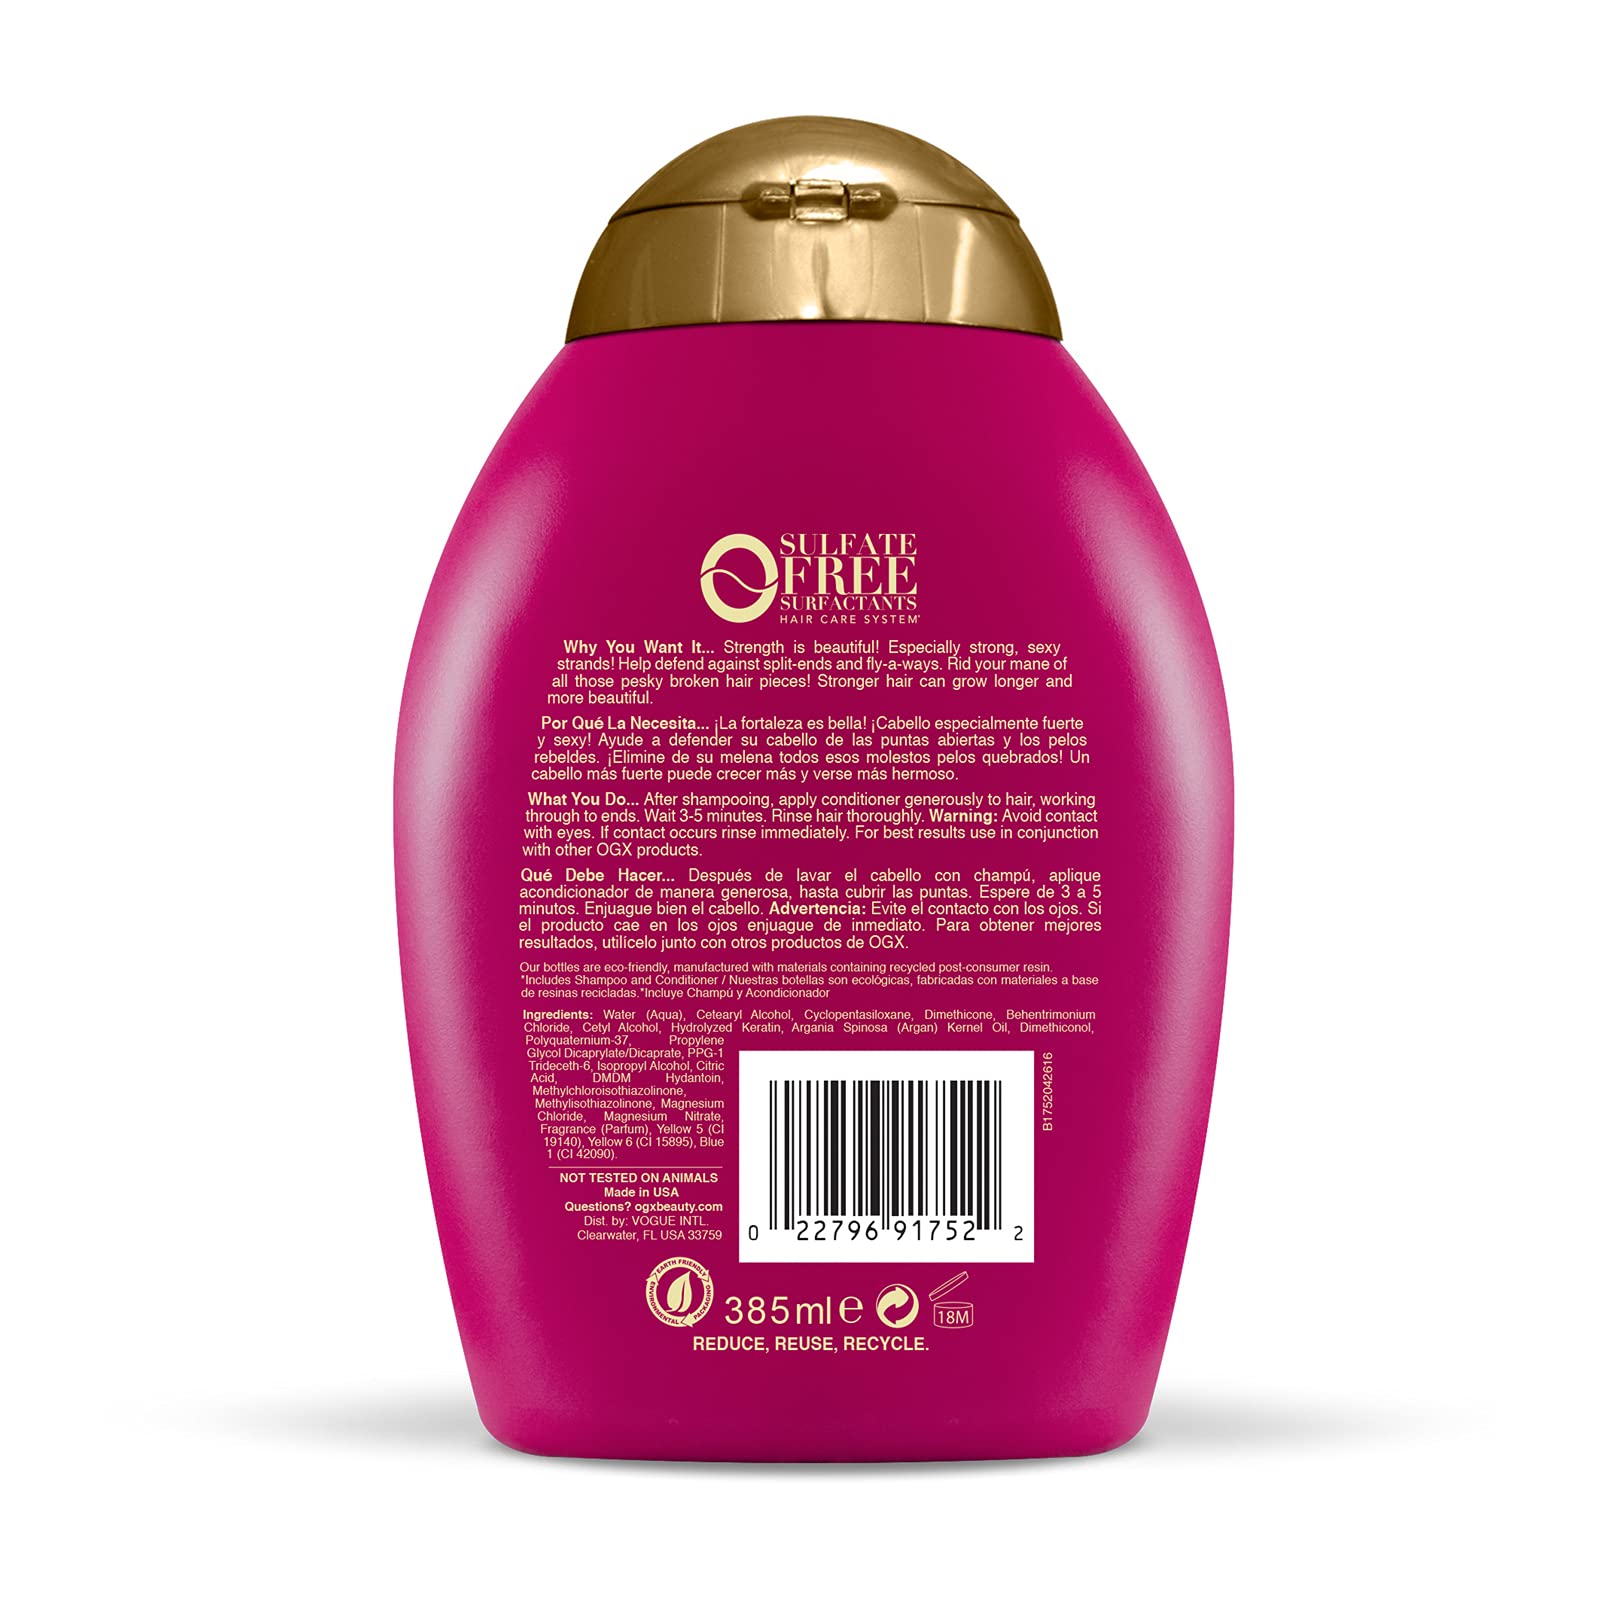 OGX Anti-Breakage + Keratin Oil Fortifying Anti-Frizz Conditioner for Damaged Hair & Split Ends, with Keratin Proteins & Argan Oil, Paraben-Free, Sulfate-Free Surfactants, 13 fl oz